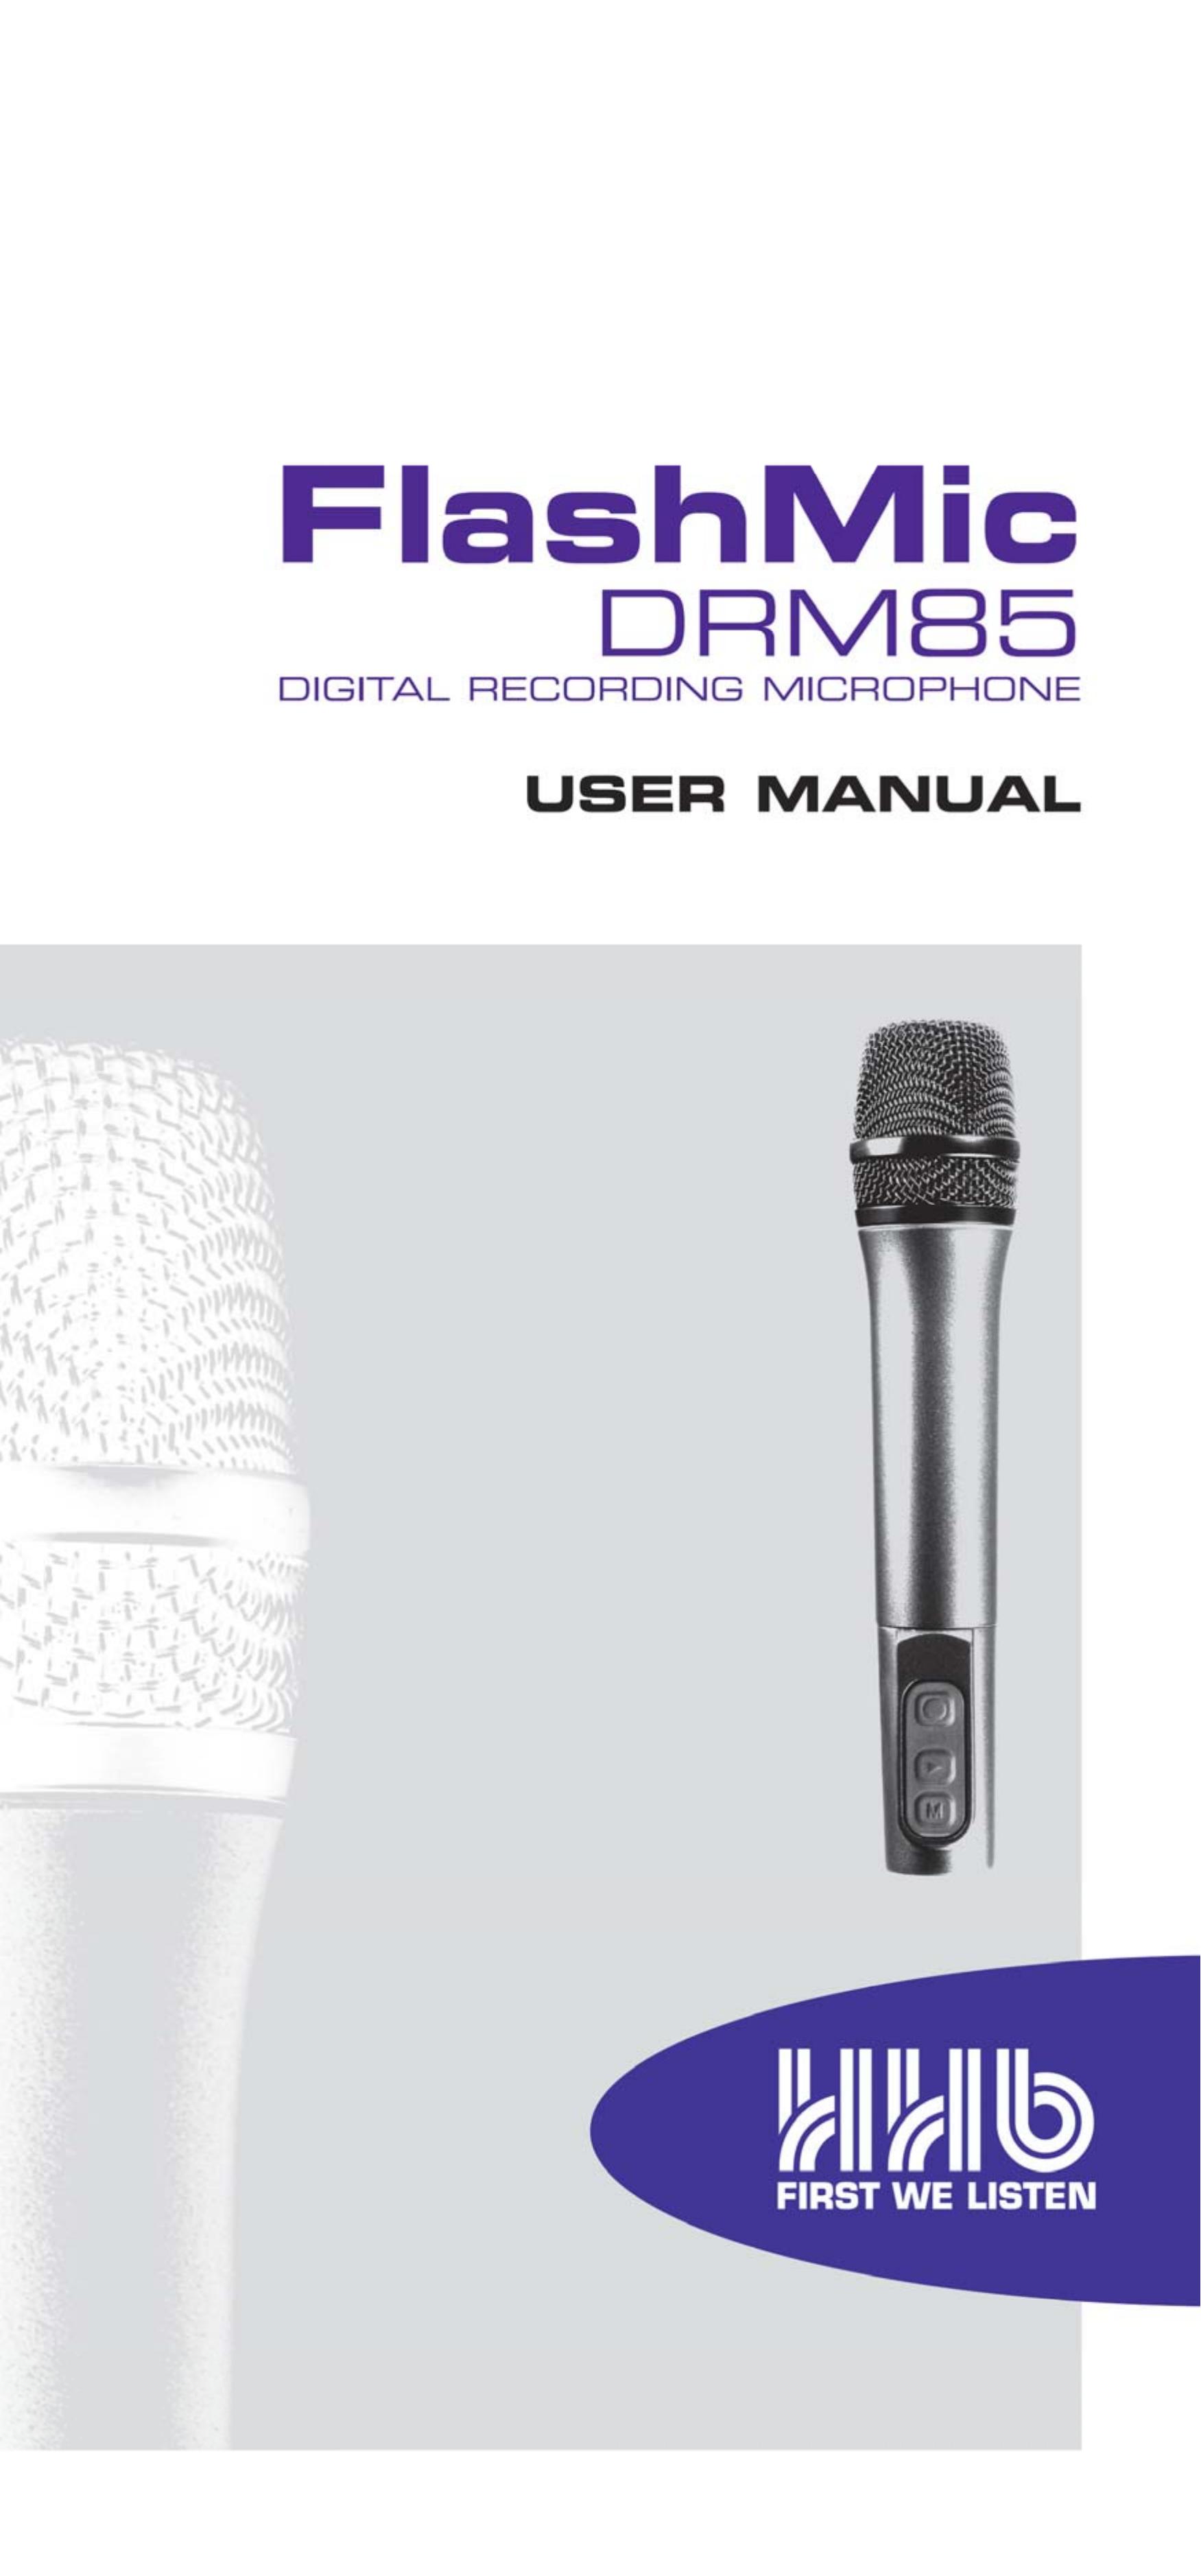 HHB comm DRM85 Microphone User Manual